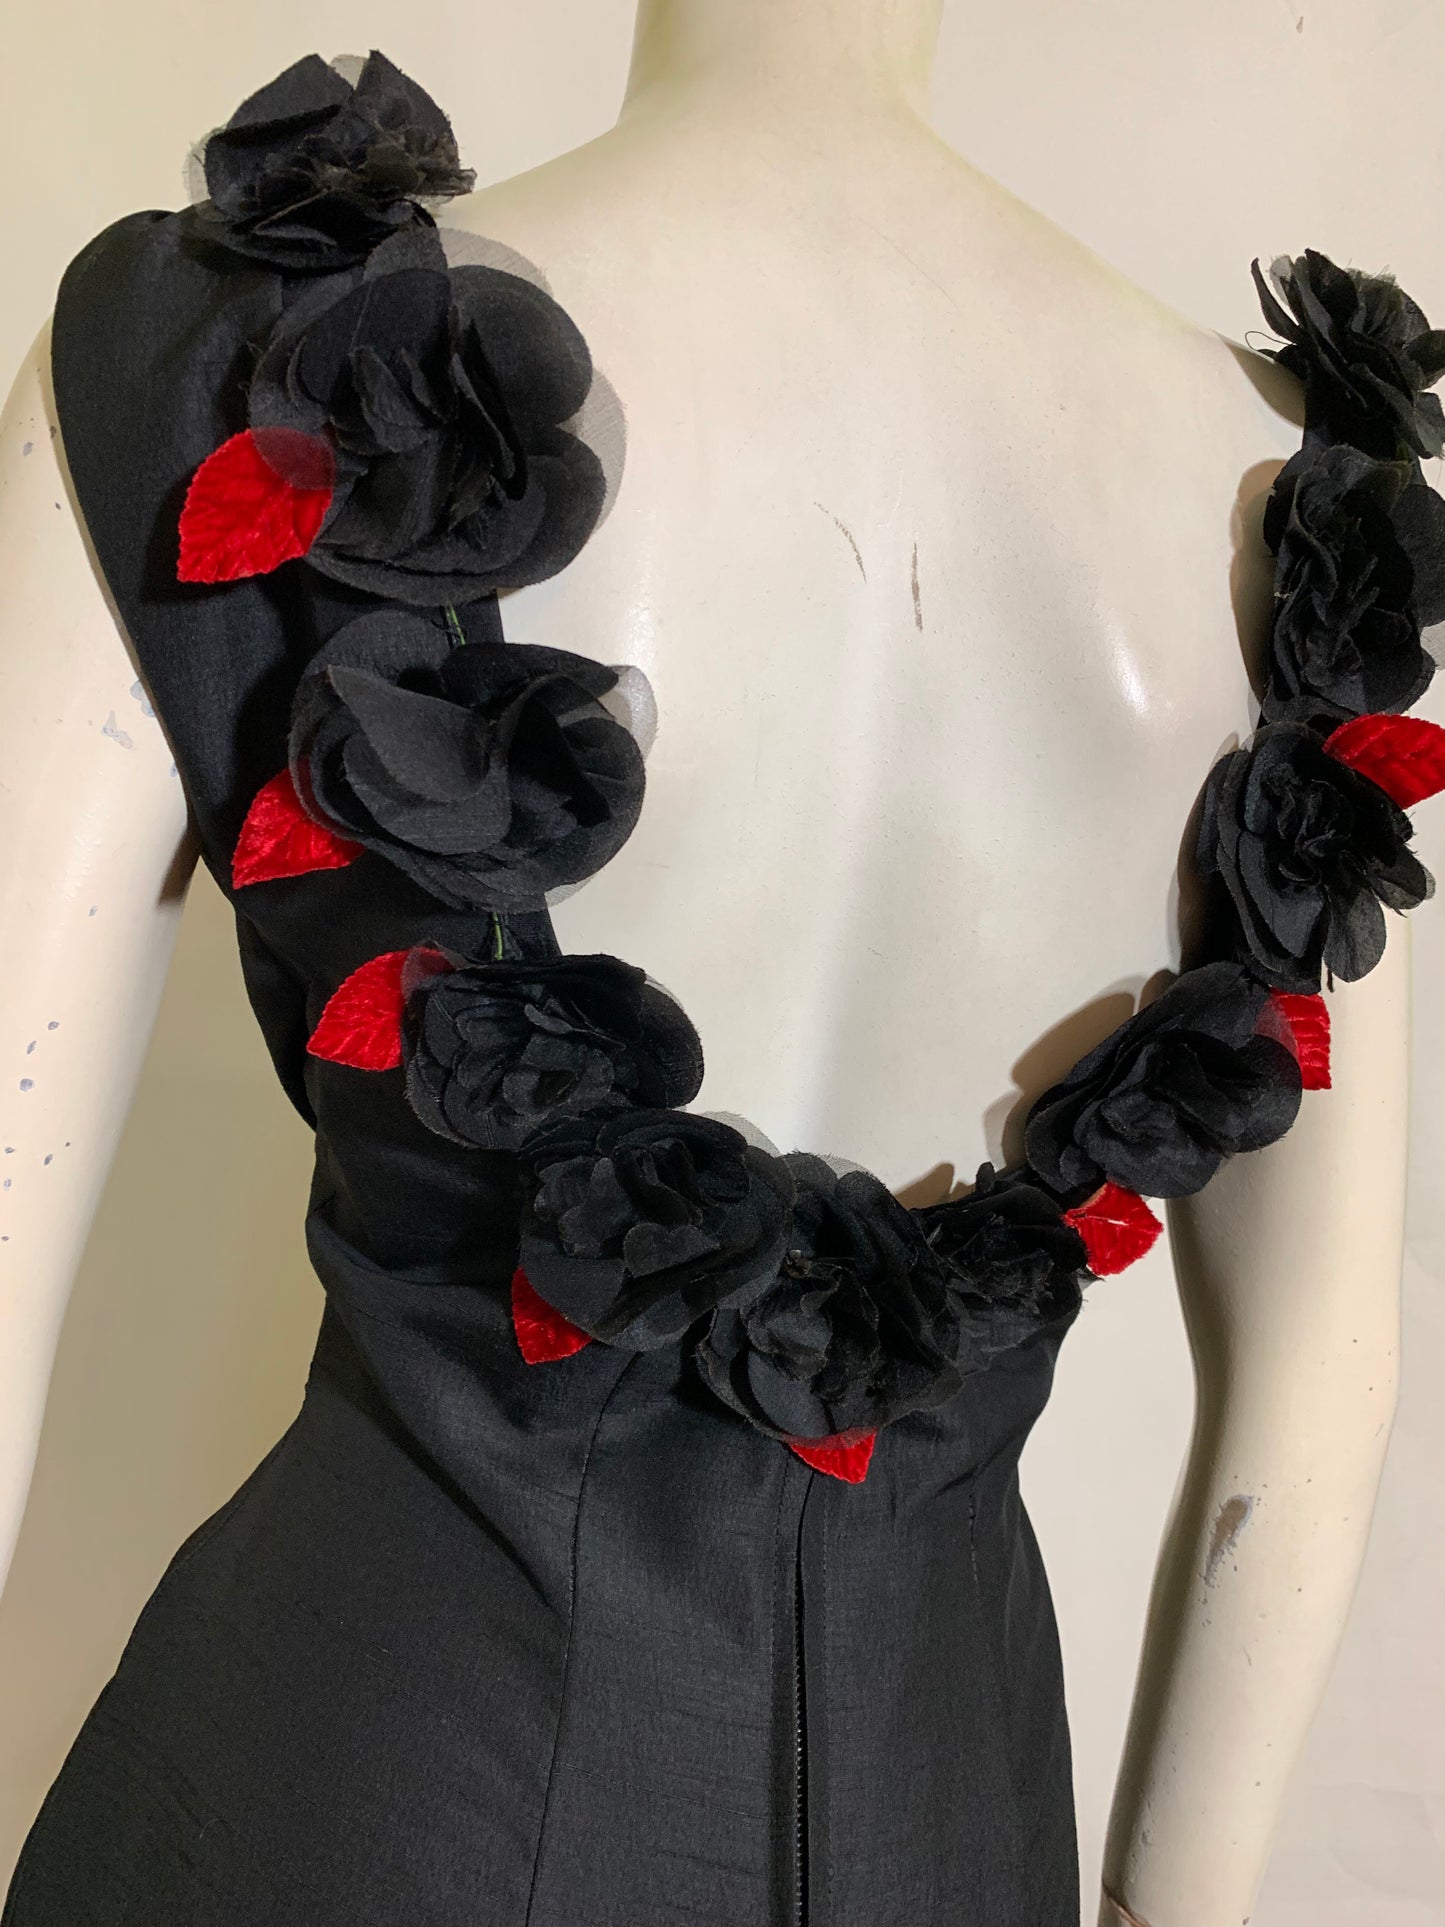 Show Stopping Figure Conscious Sleeveless Black Cocktail Dress with Daring Low Back Trimmed in Black and Red Roses circa 1950s